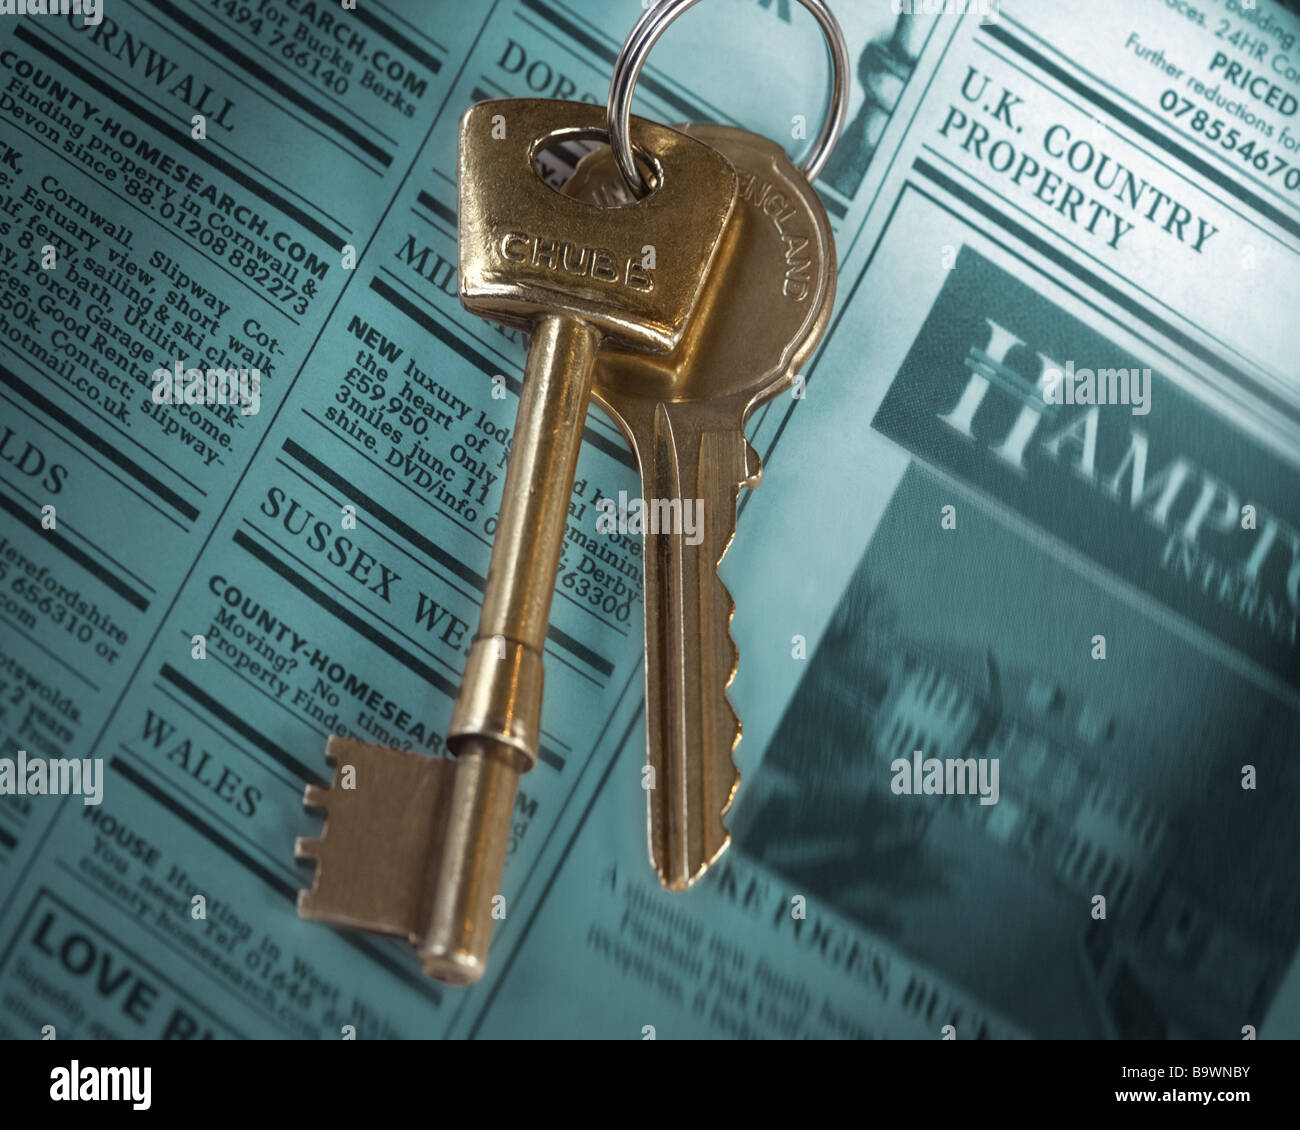 PROPERTY CONCEPT: The Keys to a New Home Stock Photo